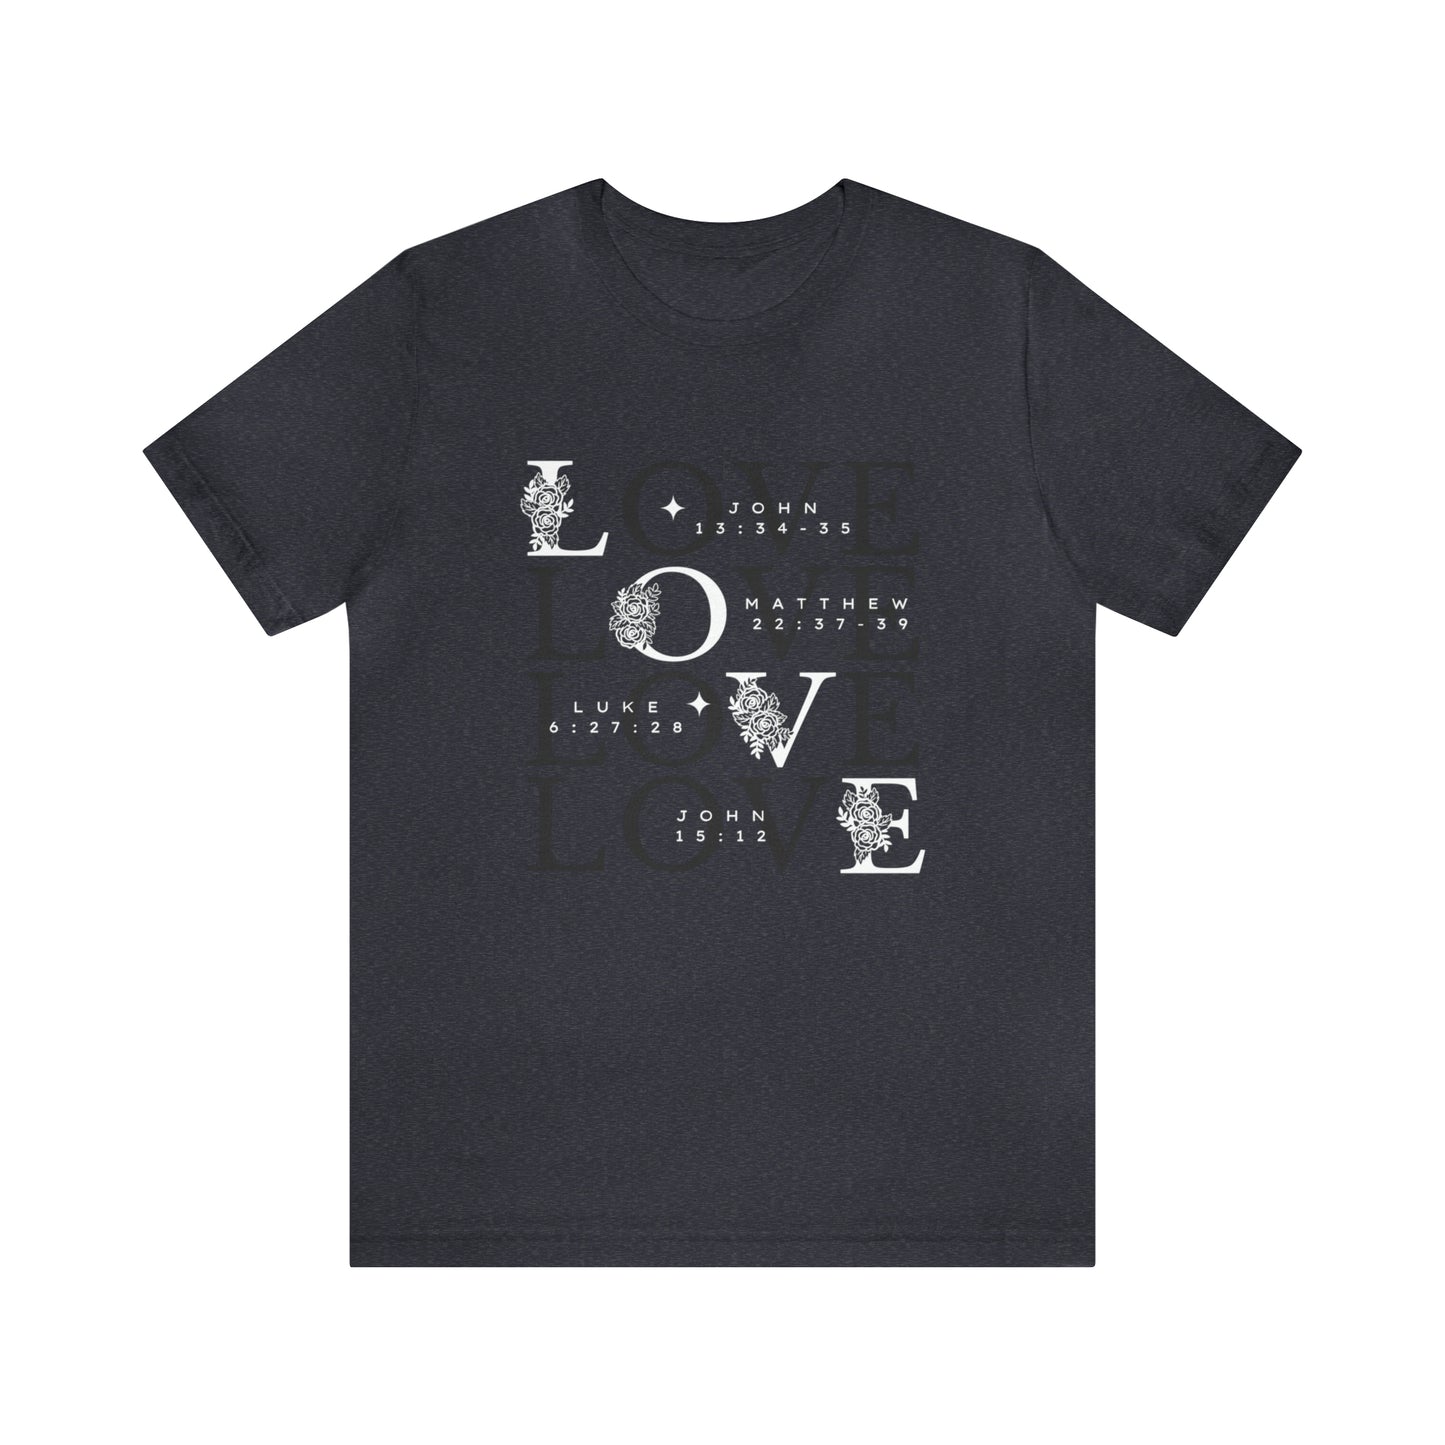 What Is Love - Unisex Jersey Short Sleeve Tee